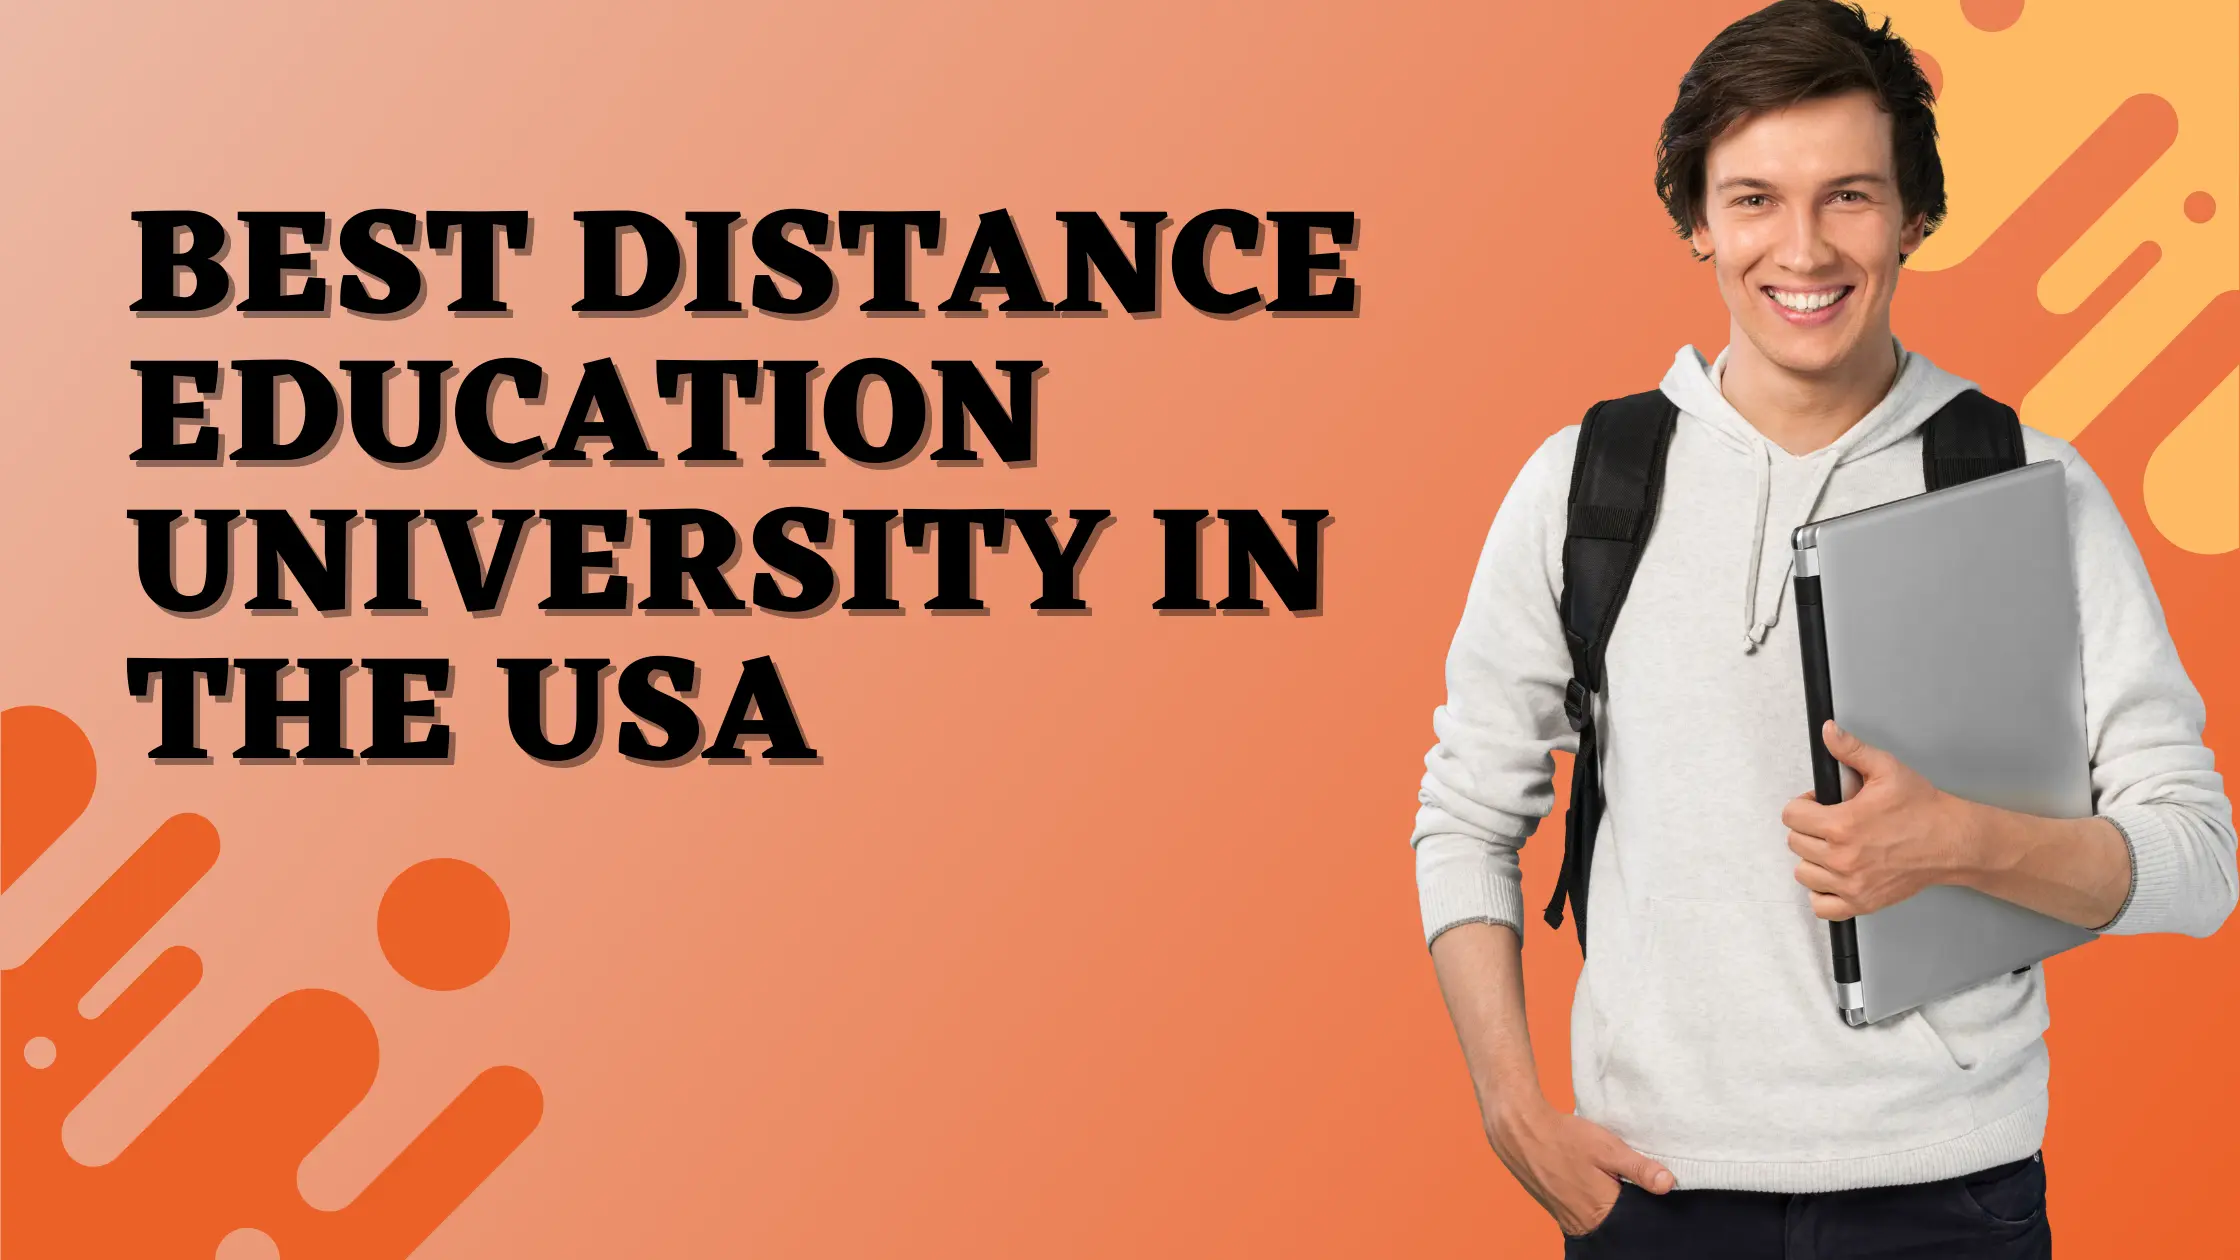 Best Distance Education University In The USA, Distance learning universities in USA for international students, Free online courses in USA for International students, Distance education in USA from India, Best distance learning universities, Free online universities in USA, American University online courses free, Online master degree in USA for international students, Accredited online universities for international students,